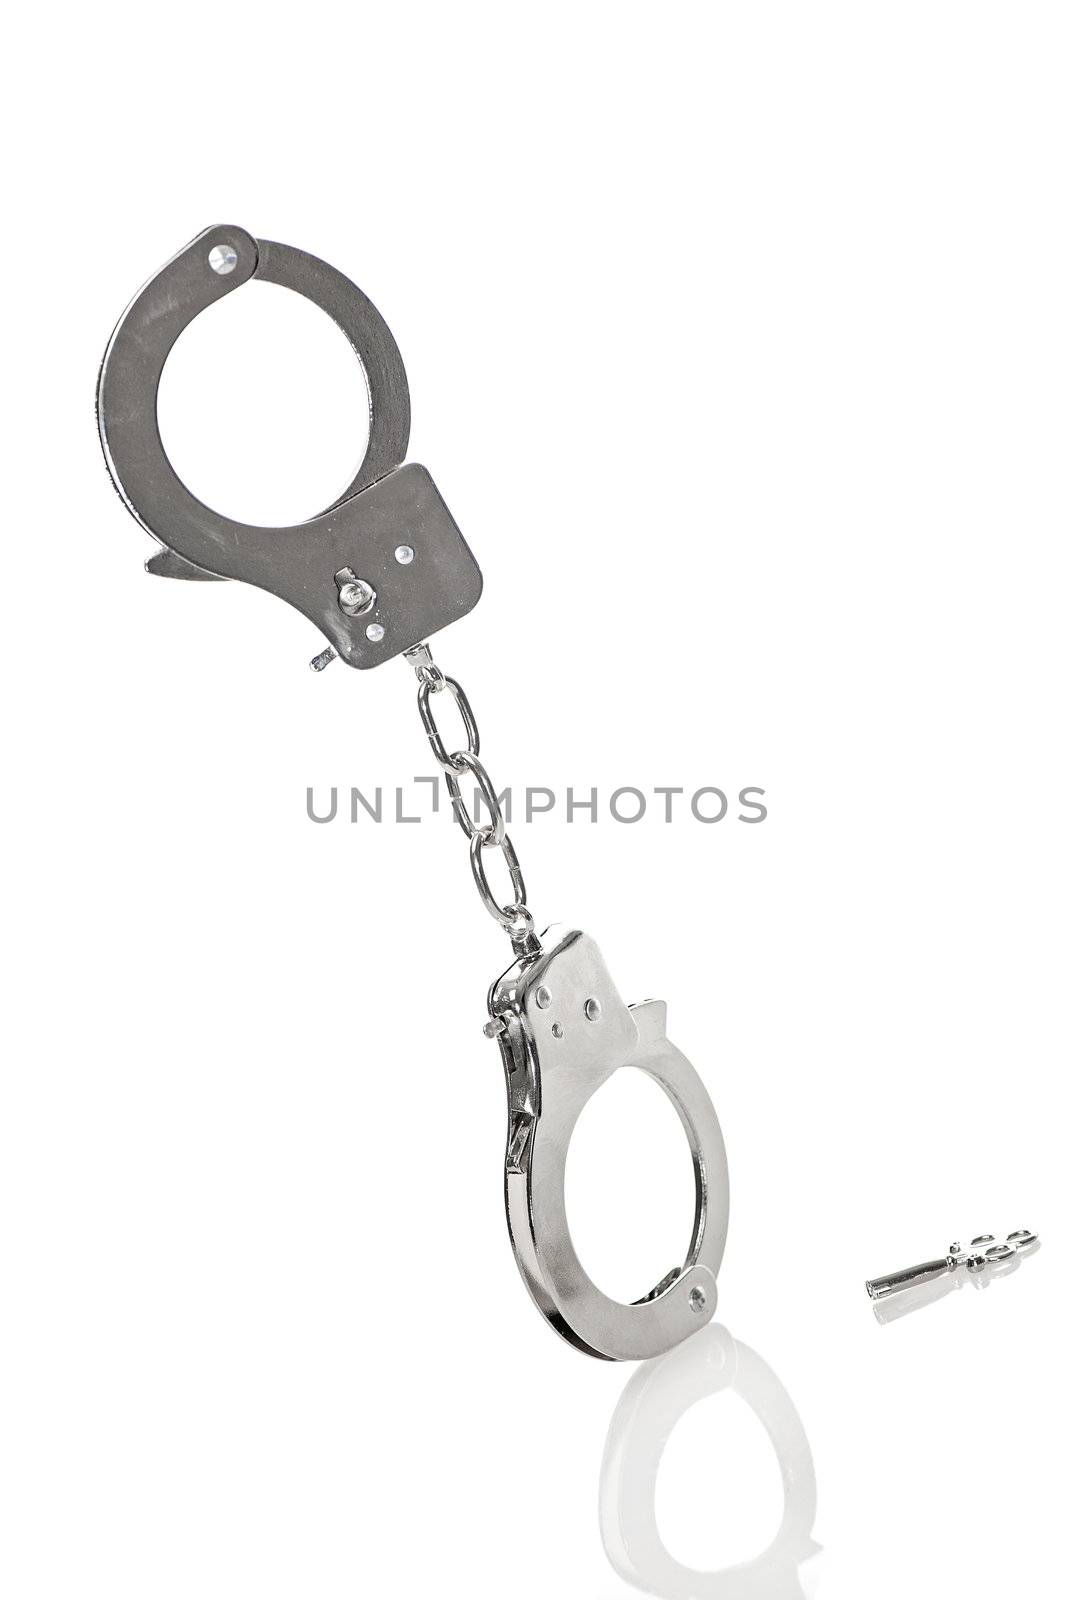 Metal Handcuffs with key by stockbymh